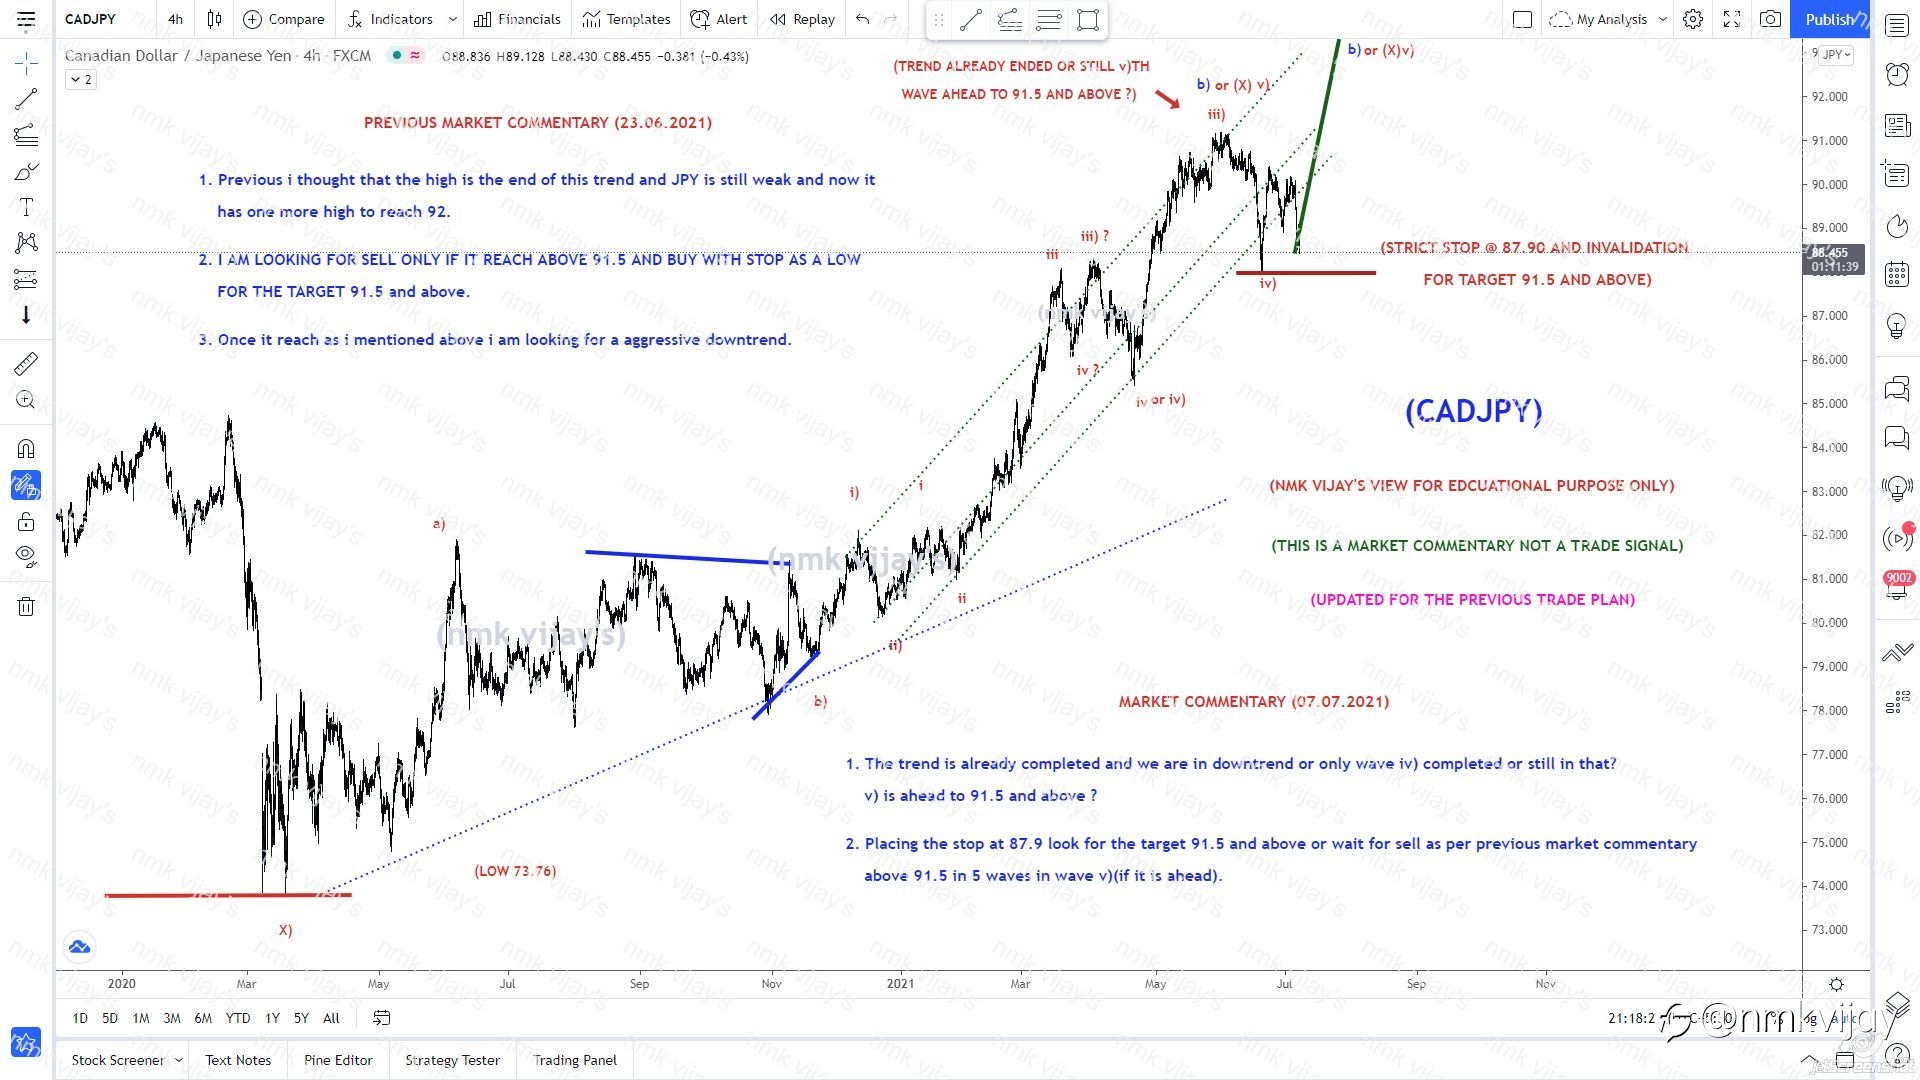 CADJPY-Wave v) is still ahead or uptrend already completed ?